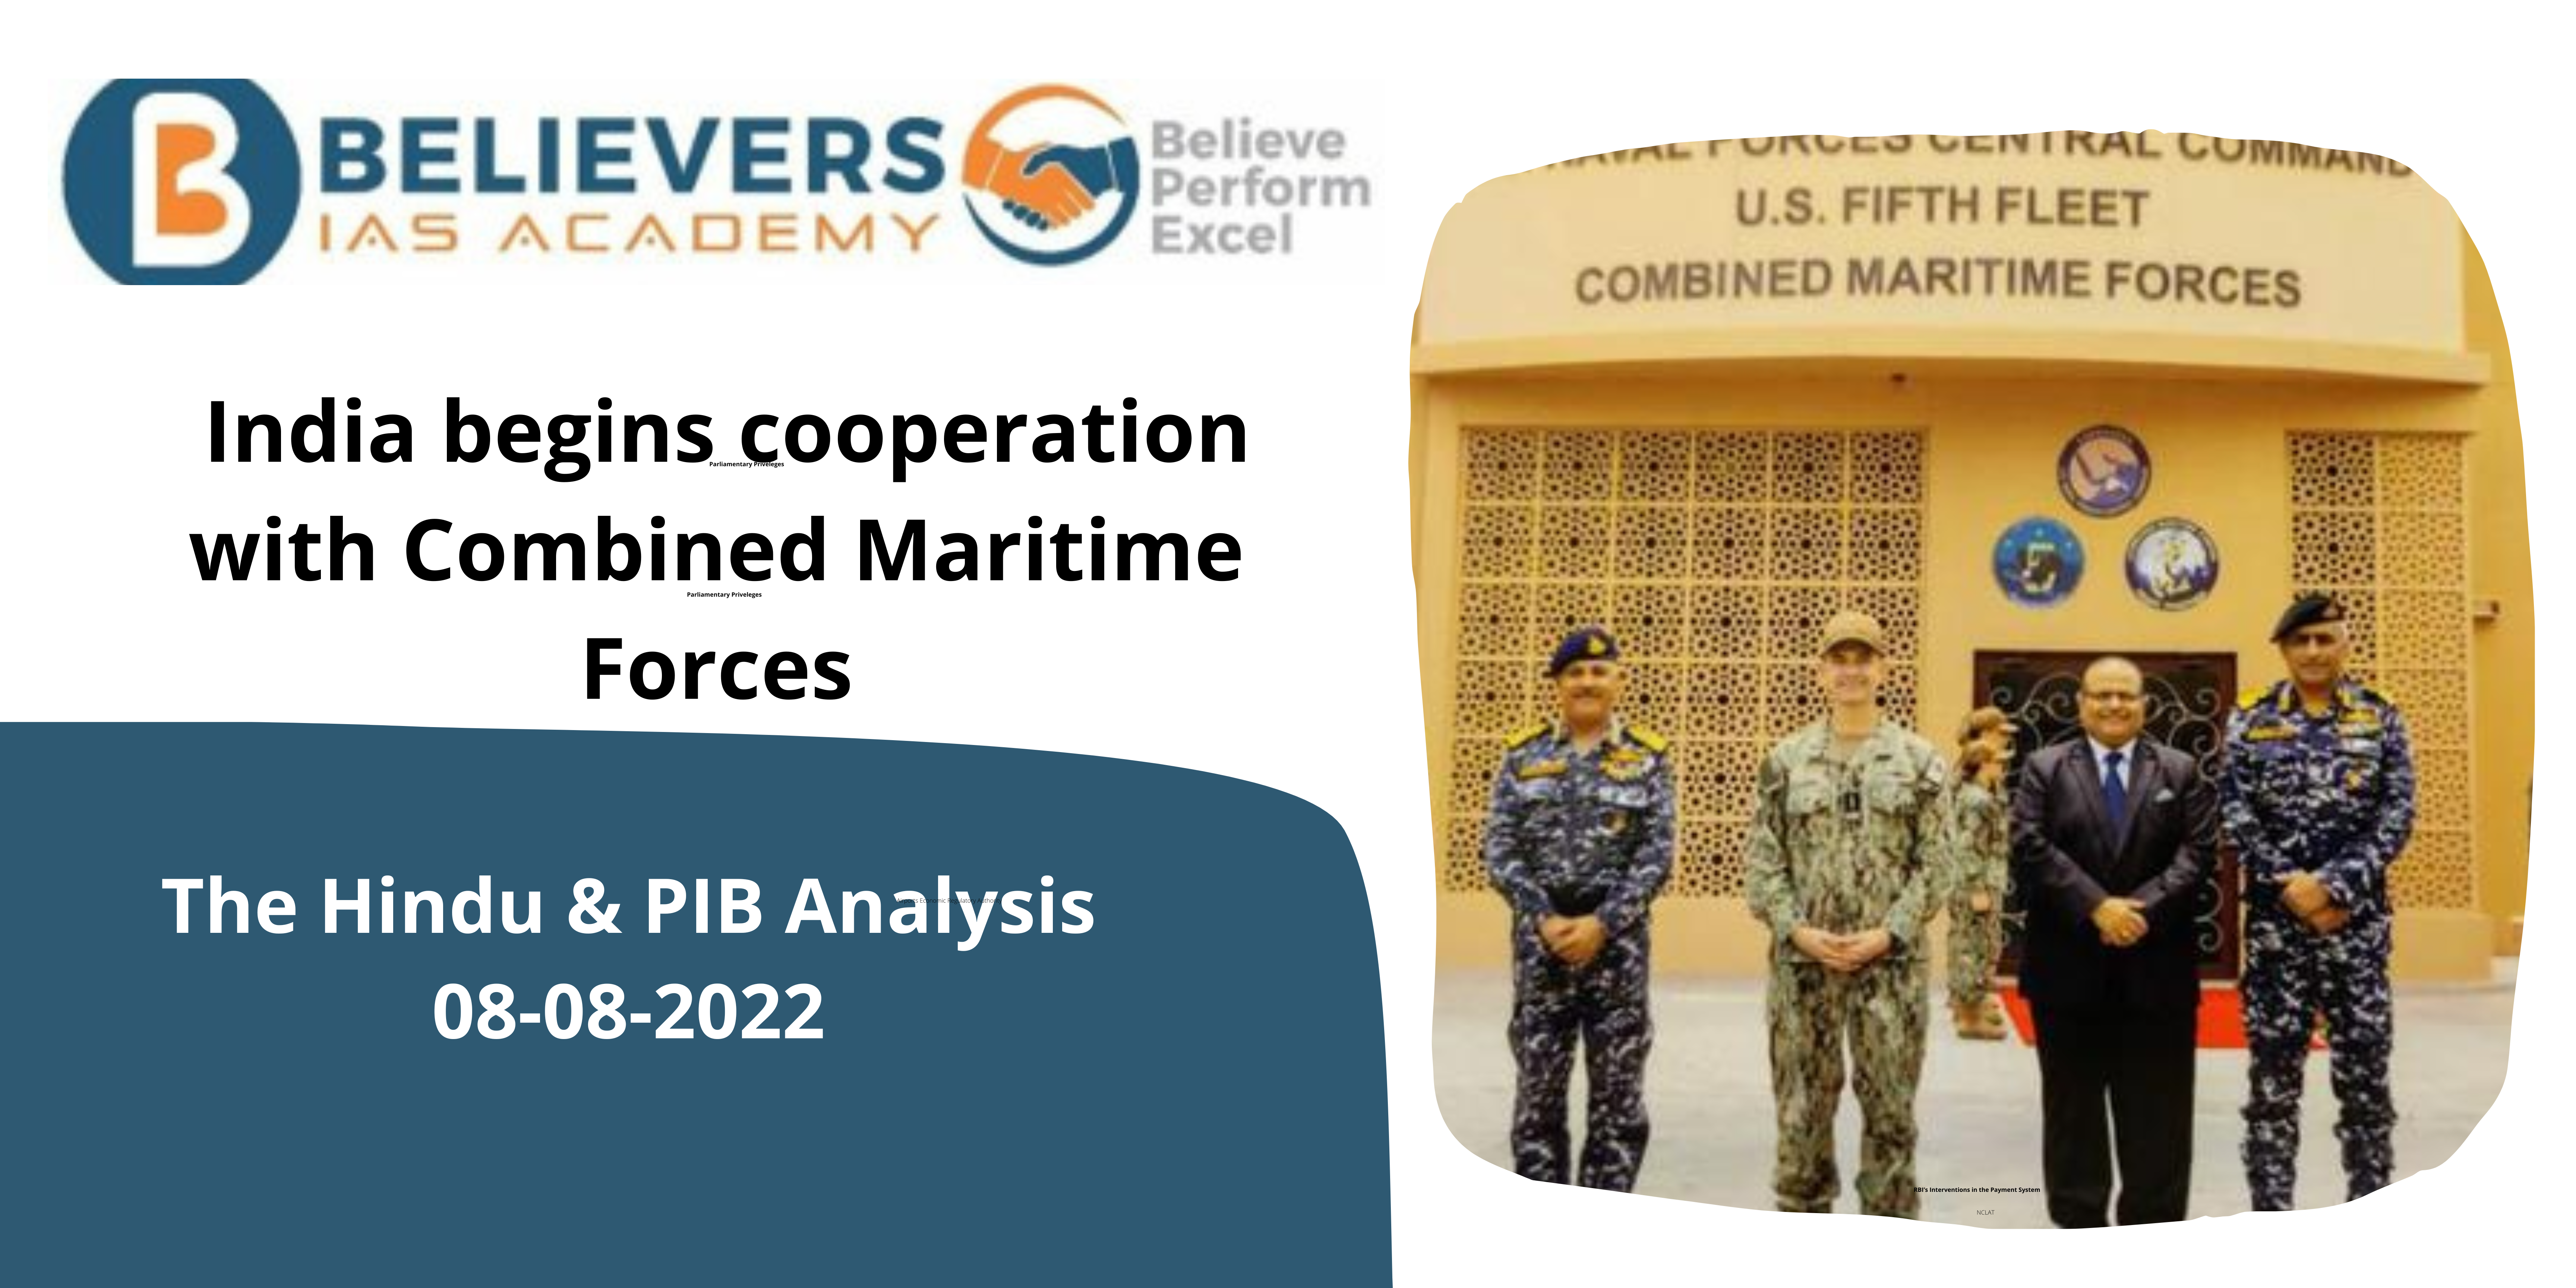 UPSC current affairs - India begins cooperation with Combined Maritime Forces